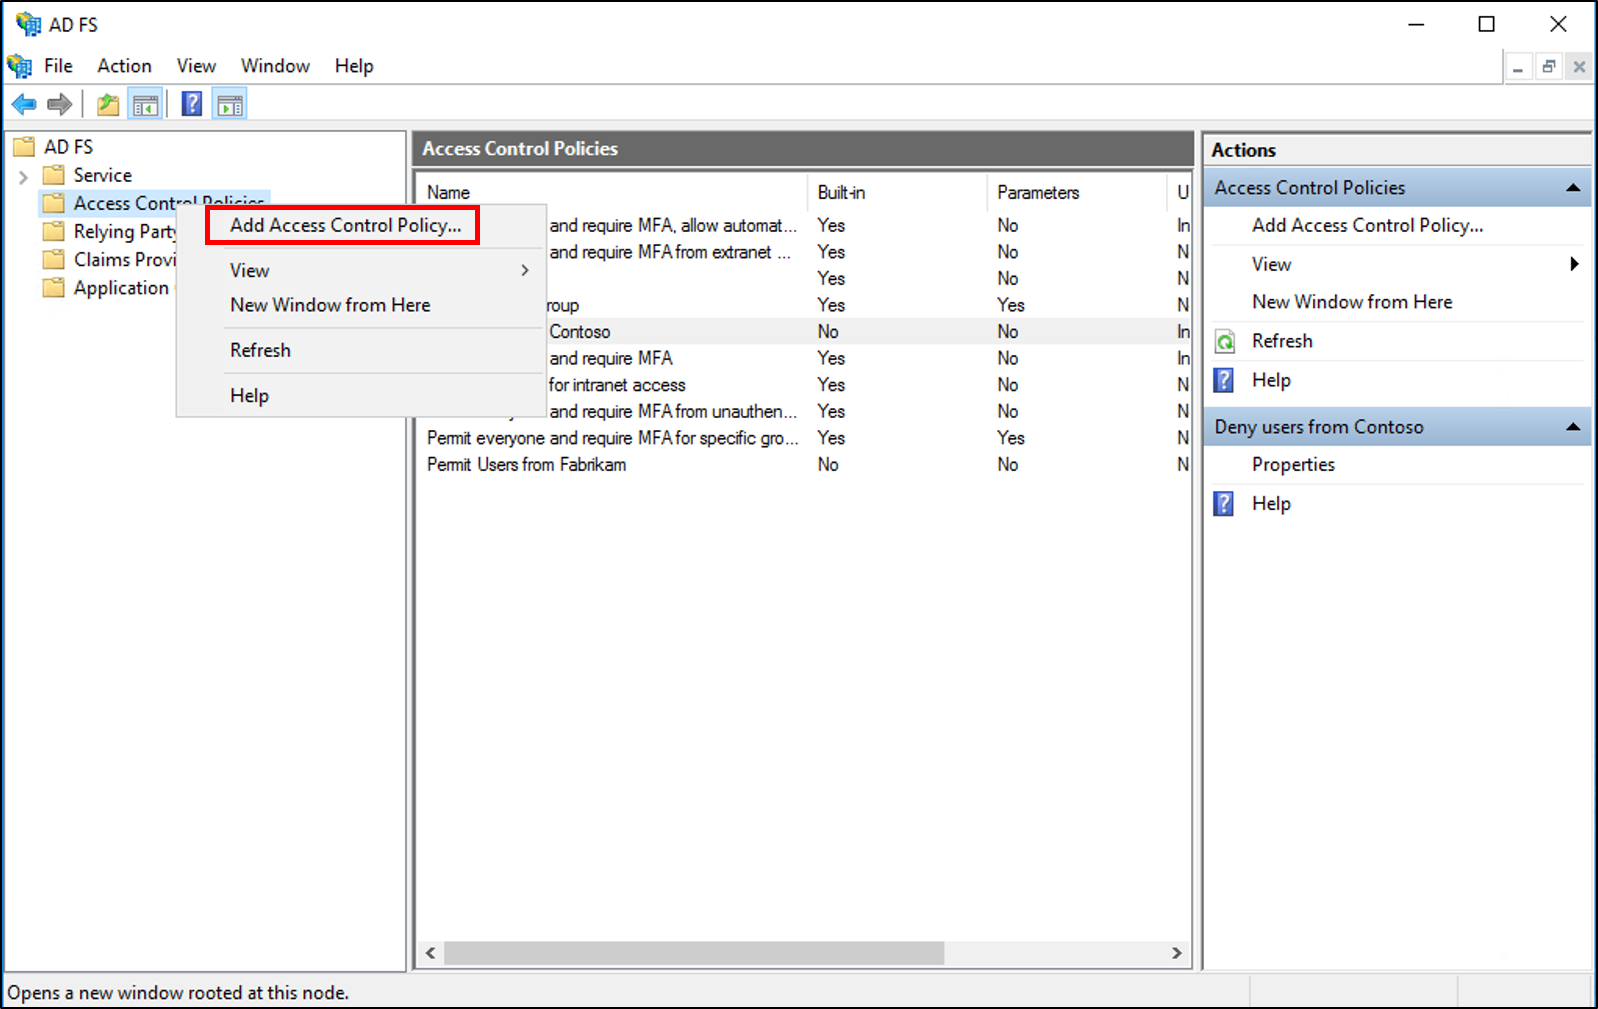 Screenshot that highlights the Add Access Control Policy menu option.